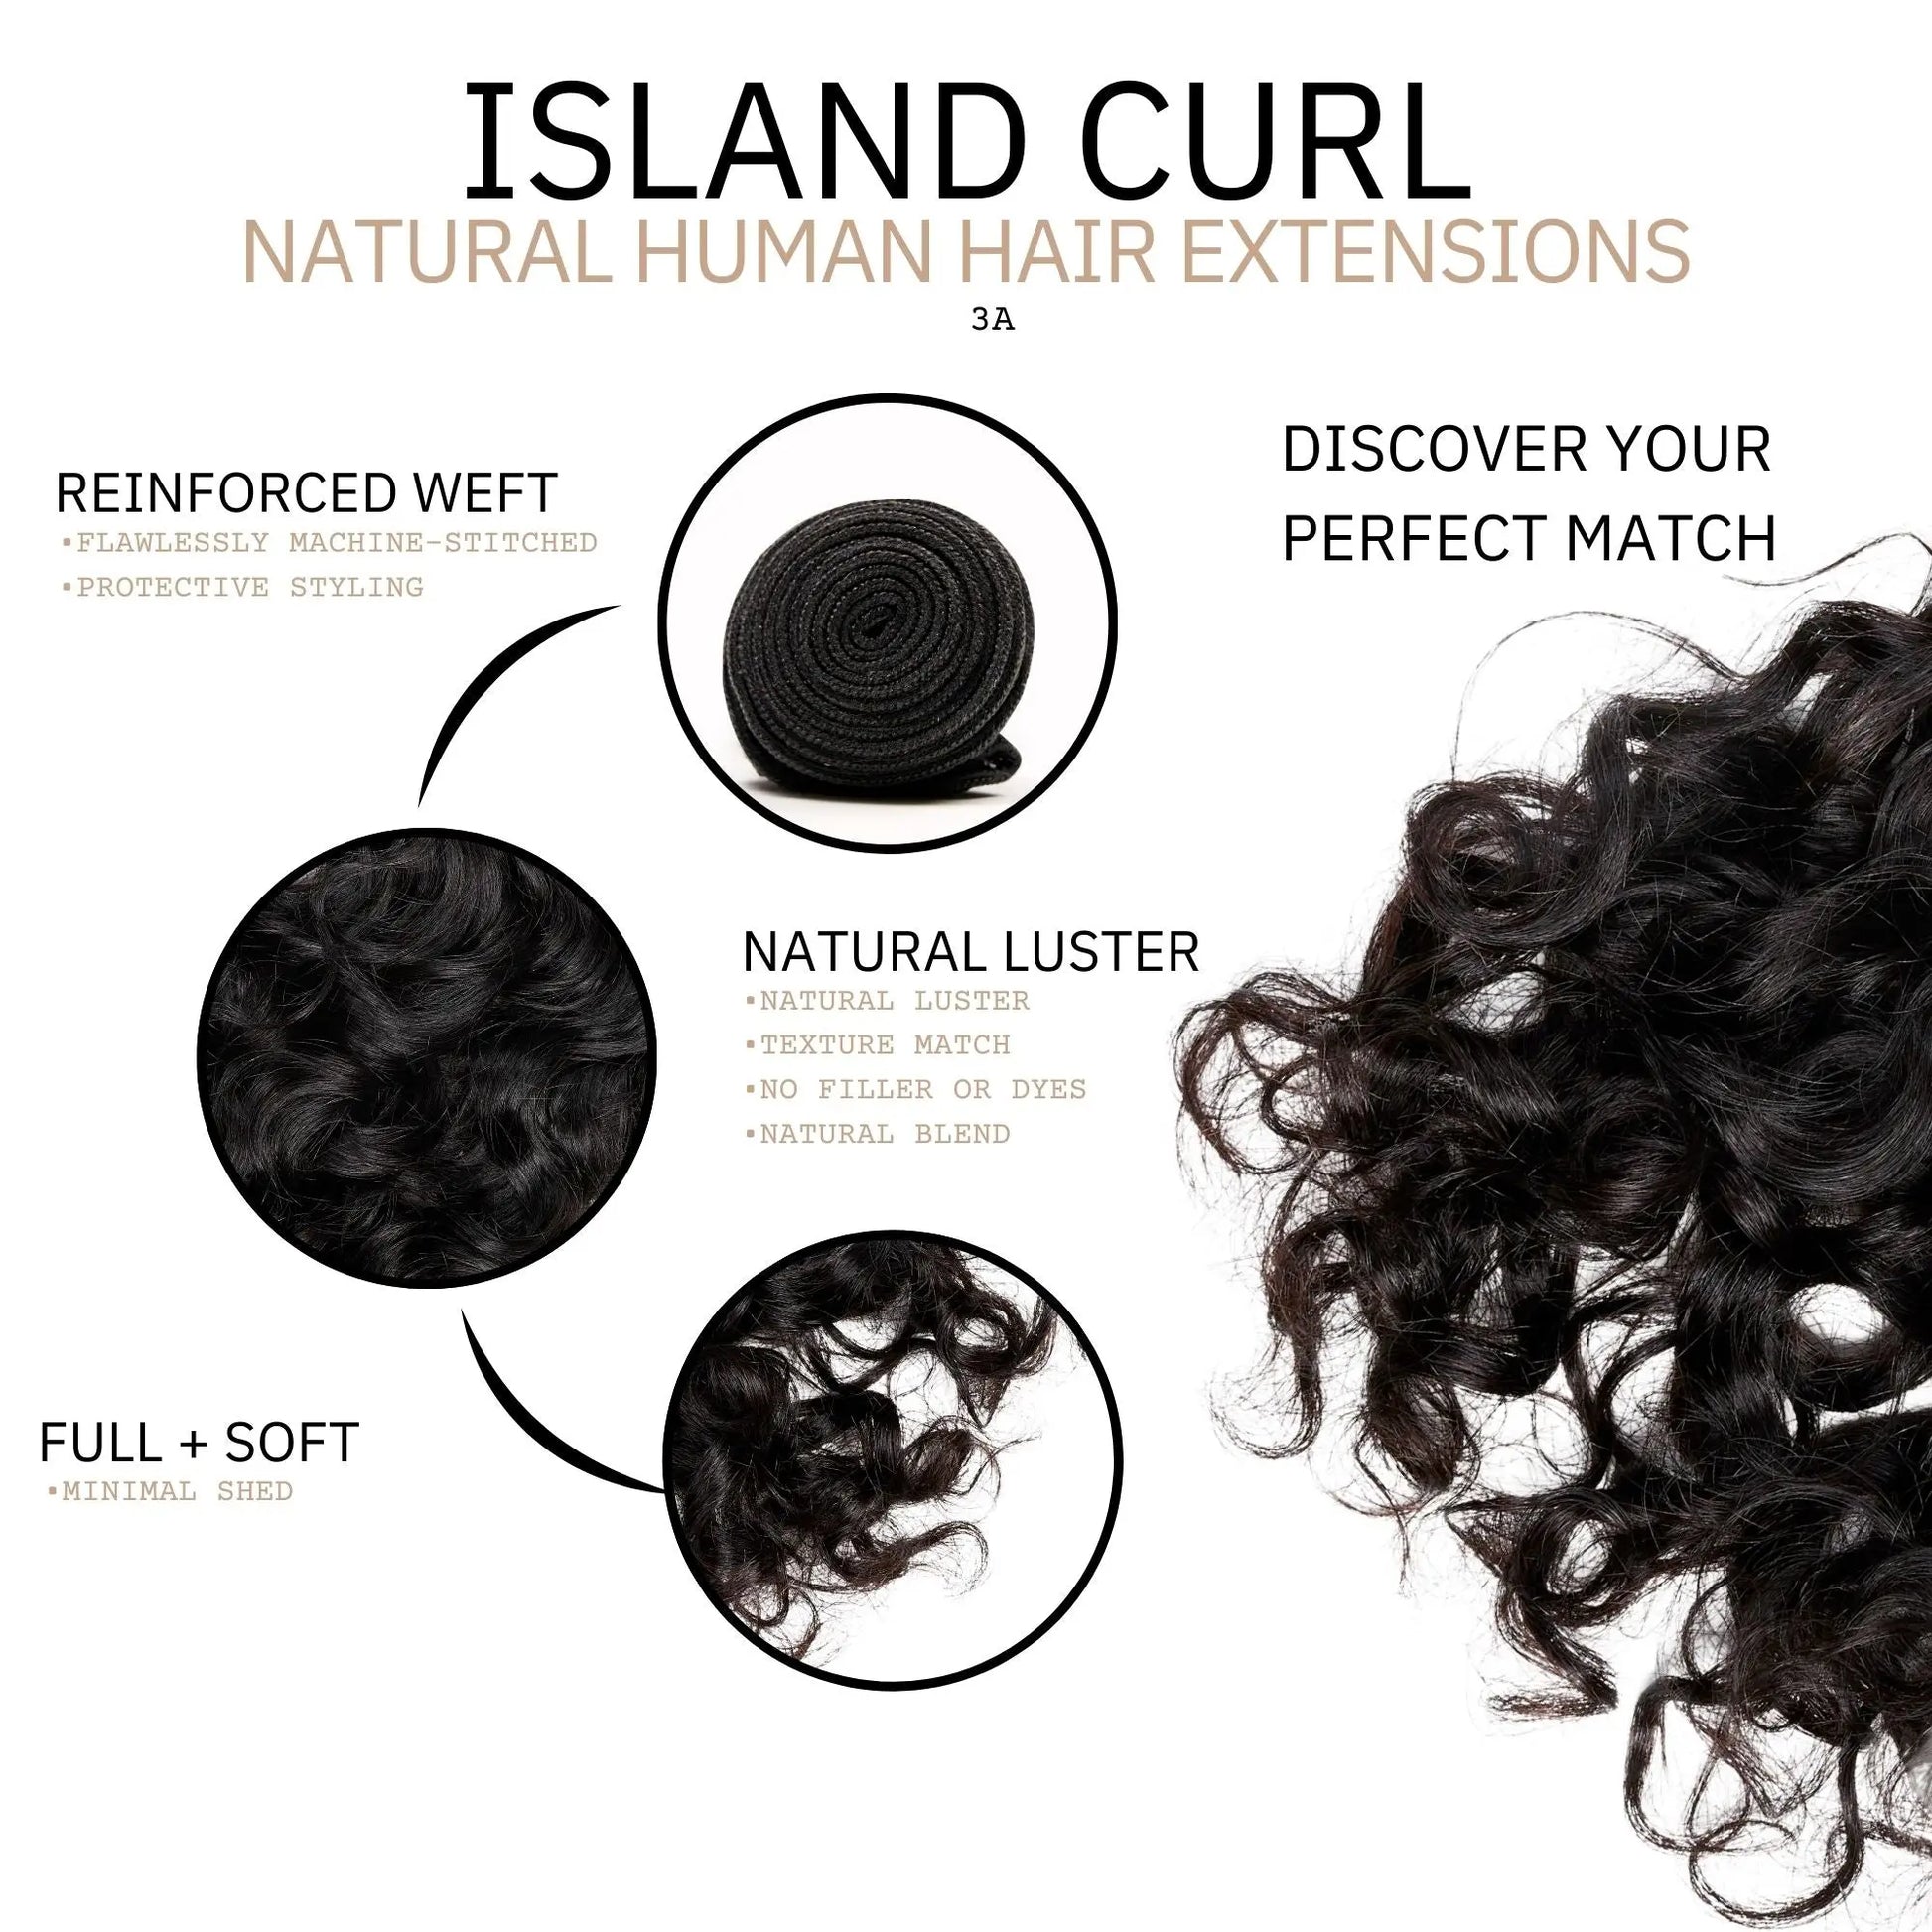 ISLAND CURL - NATURAL HAIR EXTENSIONS True and Pure Texture